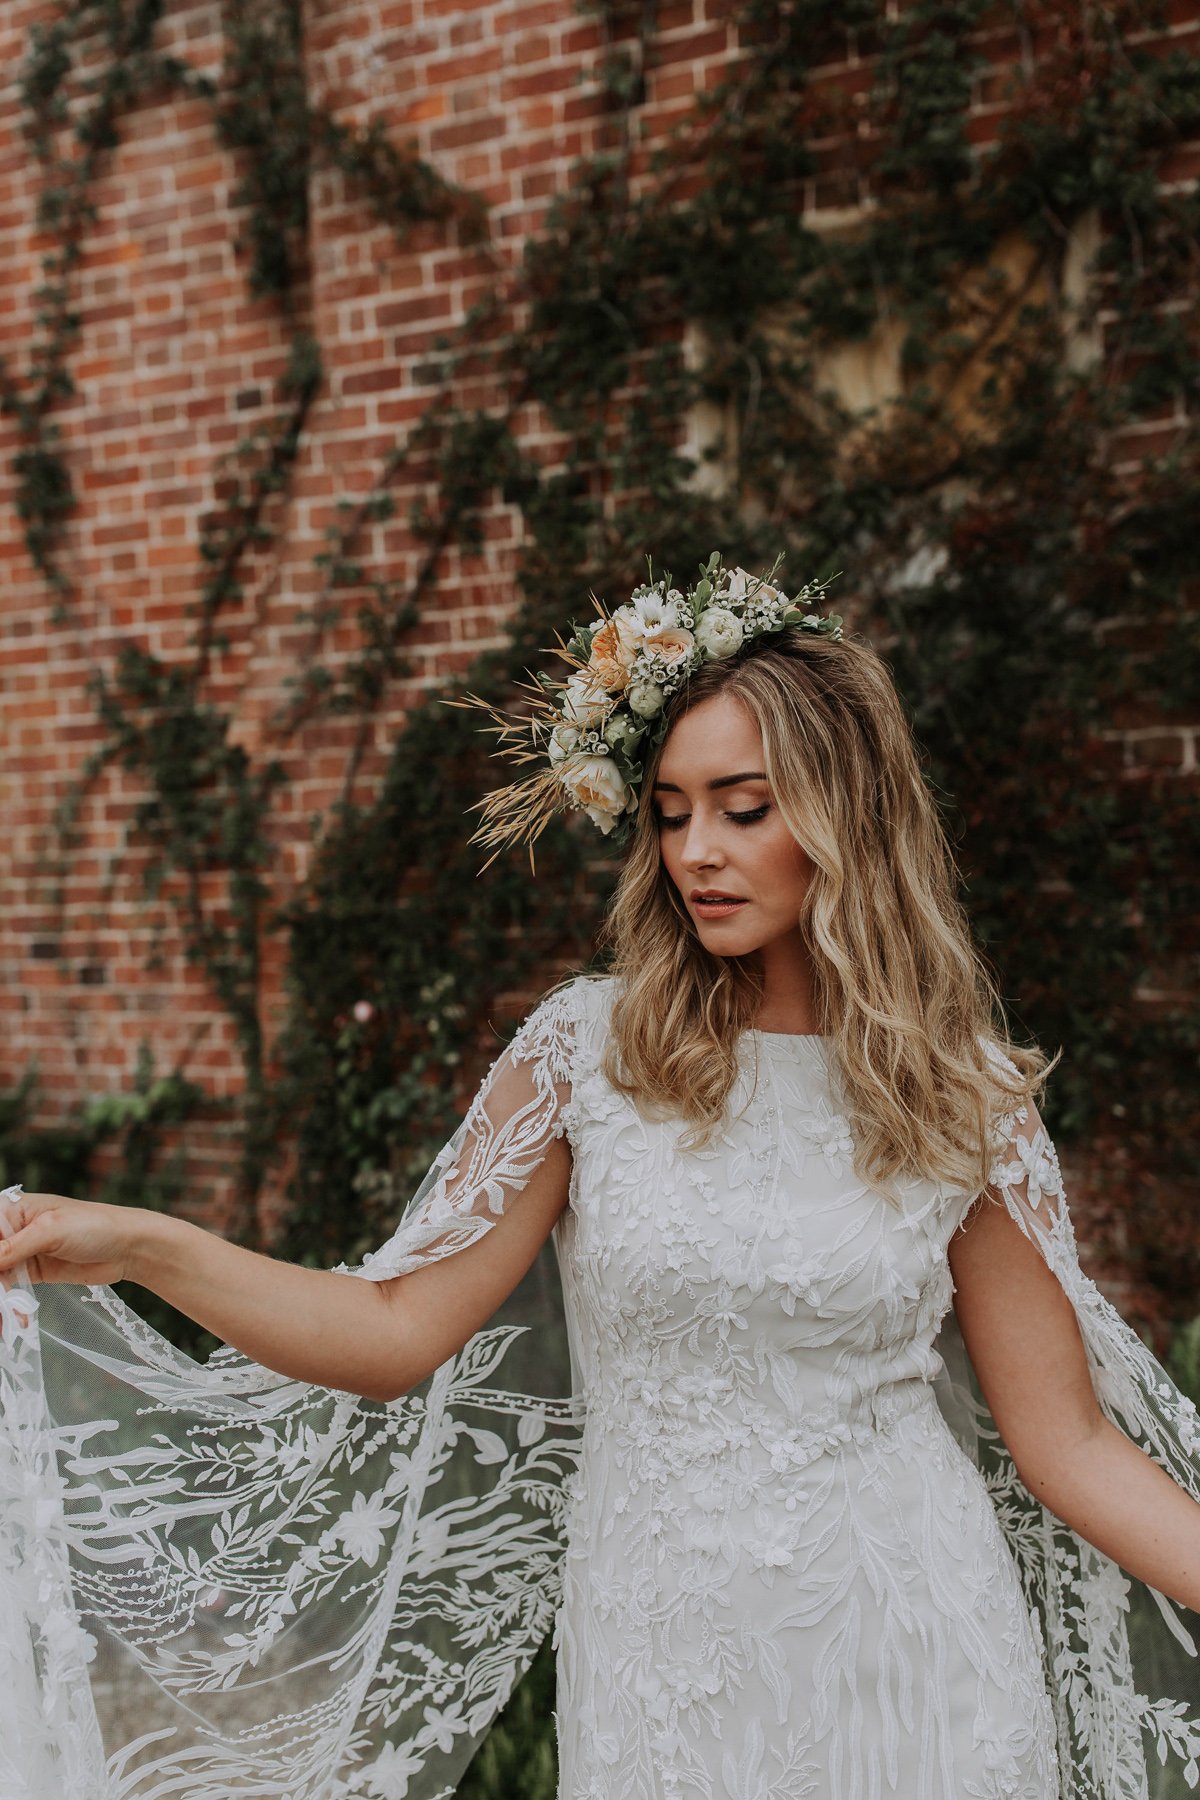 Harvest Moon bridal editorial  - Harvest Moon: A Beautiful Bridal Editorial by a Talented Team of British Wedding Suppliers